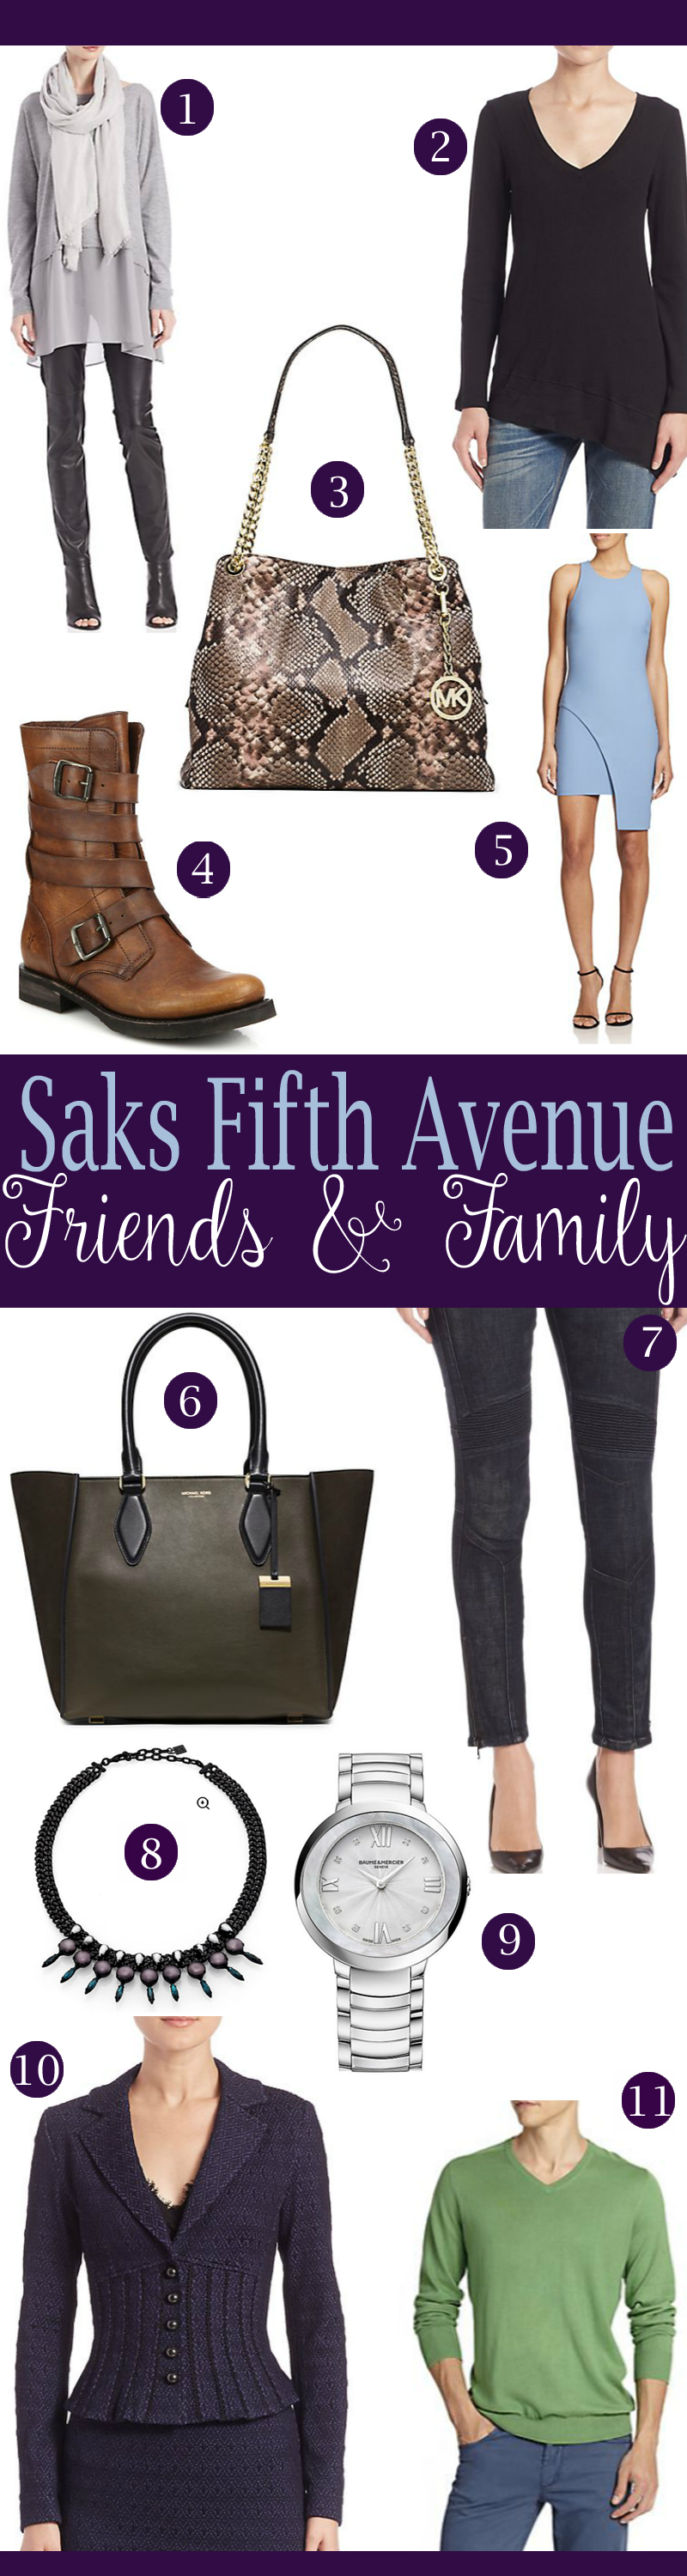 Saks Friends and Family October 2015, Saks Friends Family Sale Oct 2015